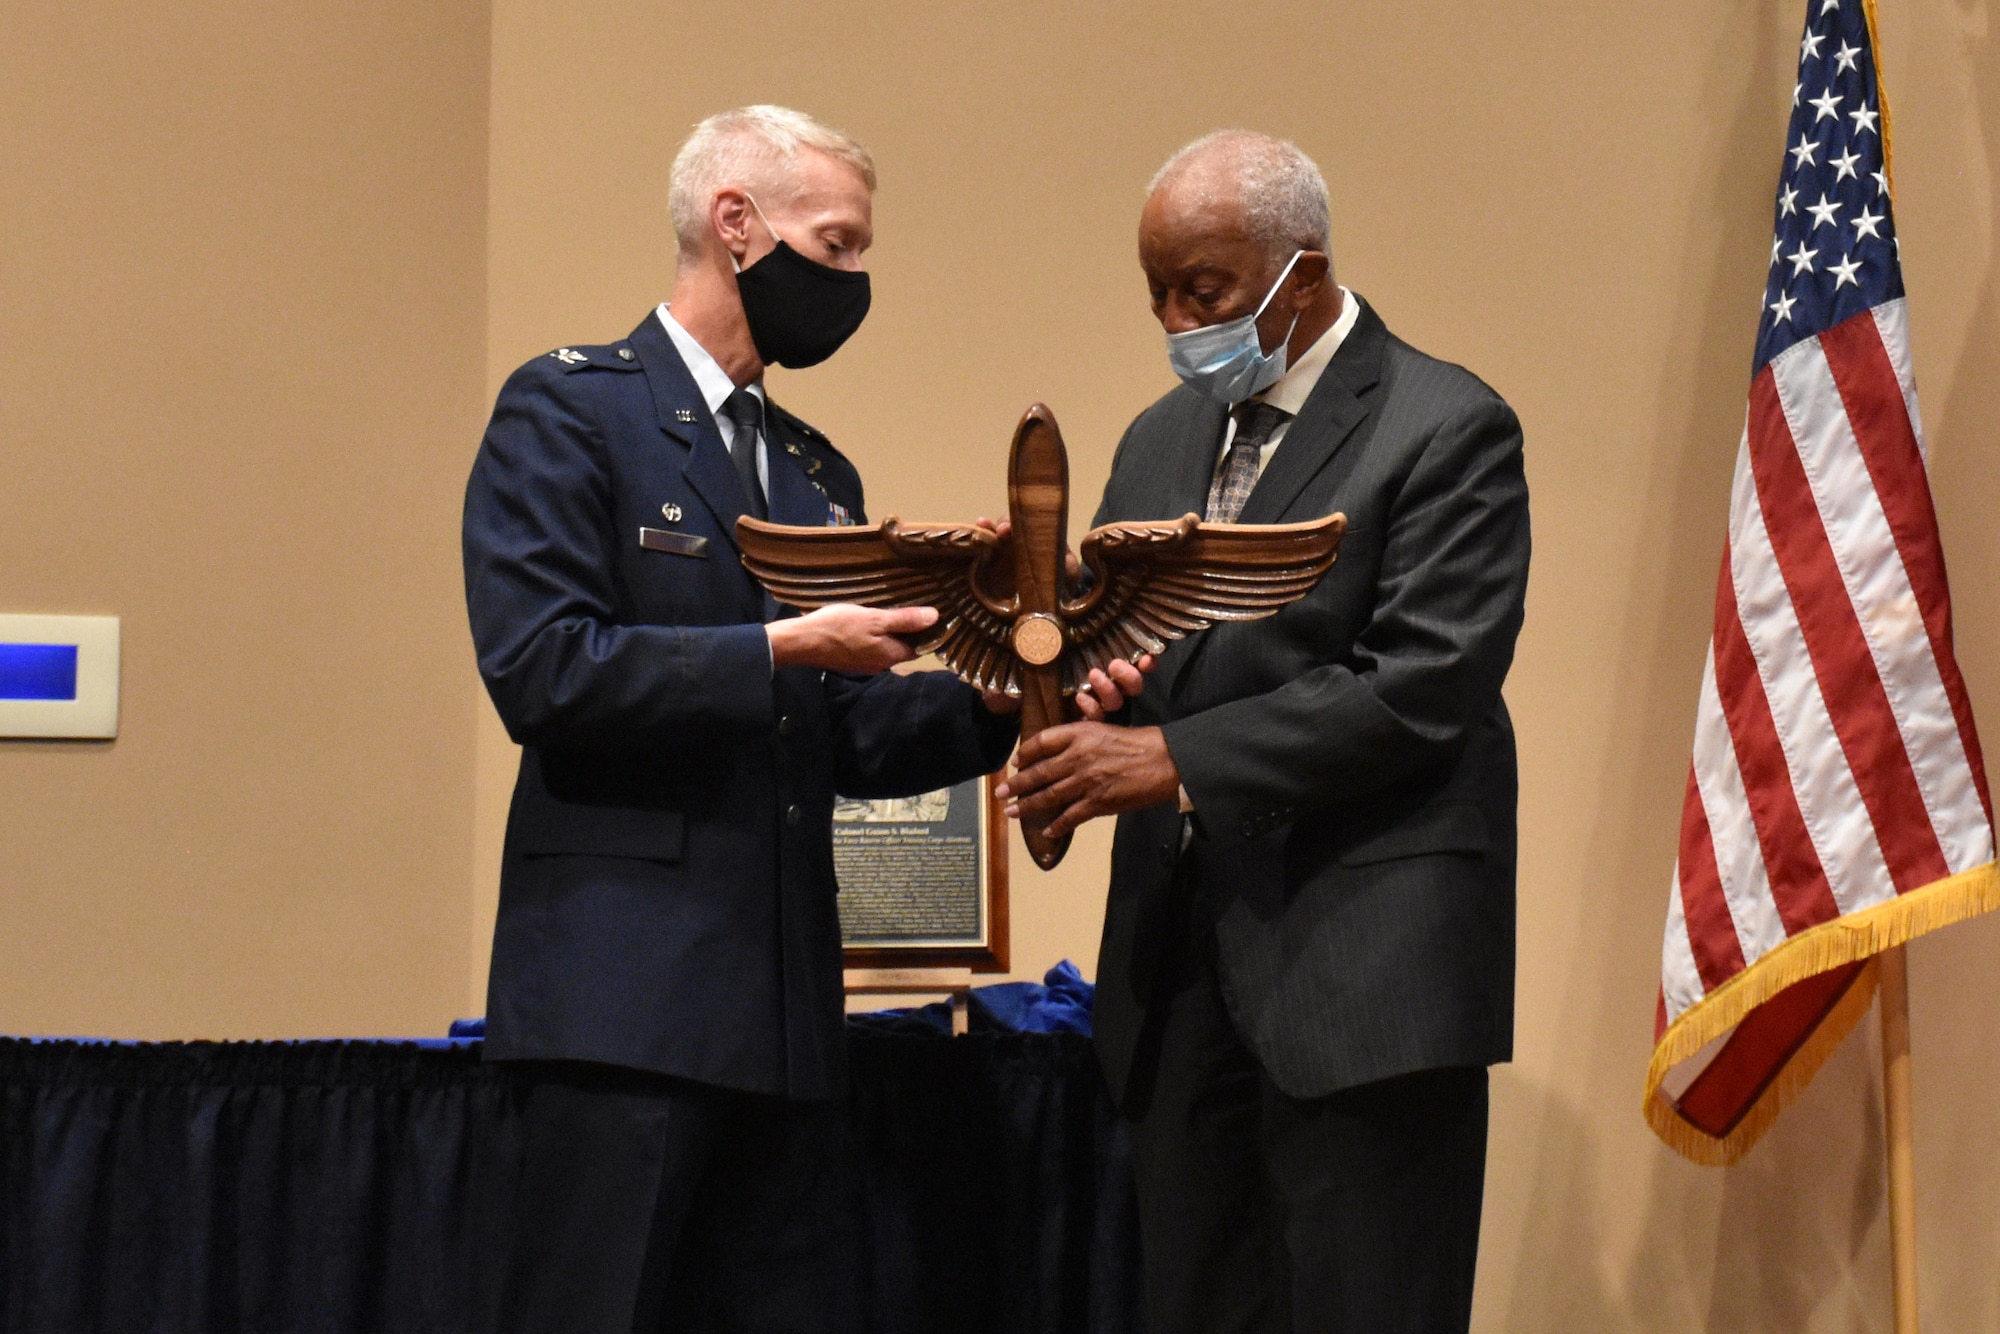 Retired Col. Guion “Guy” Bluford Jr. received the 2021 Air Force Reserve Officer Training Corps Distinguished Alumnus Award during a ceremony at Penn State on Oct. 6, 2021.